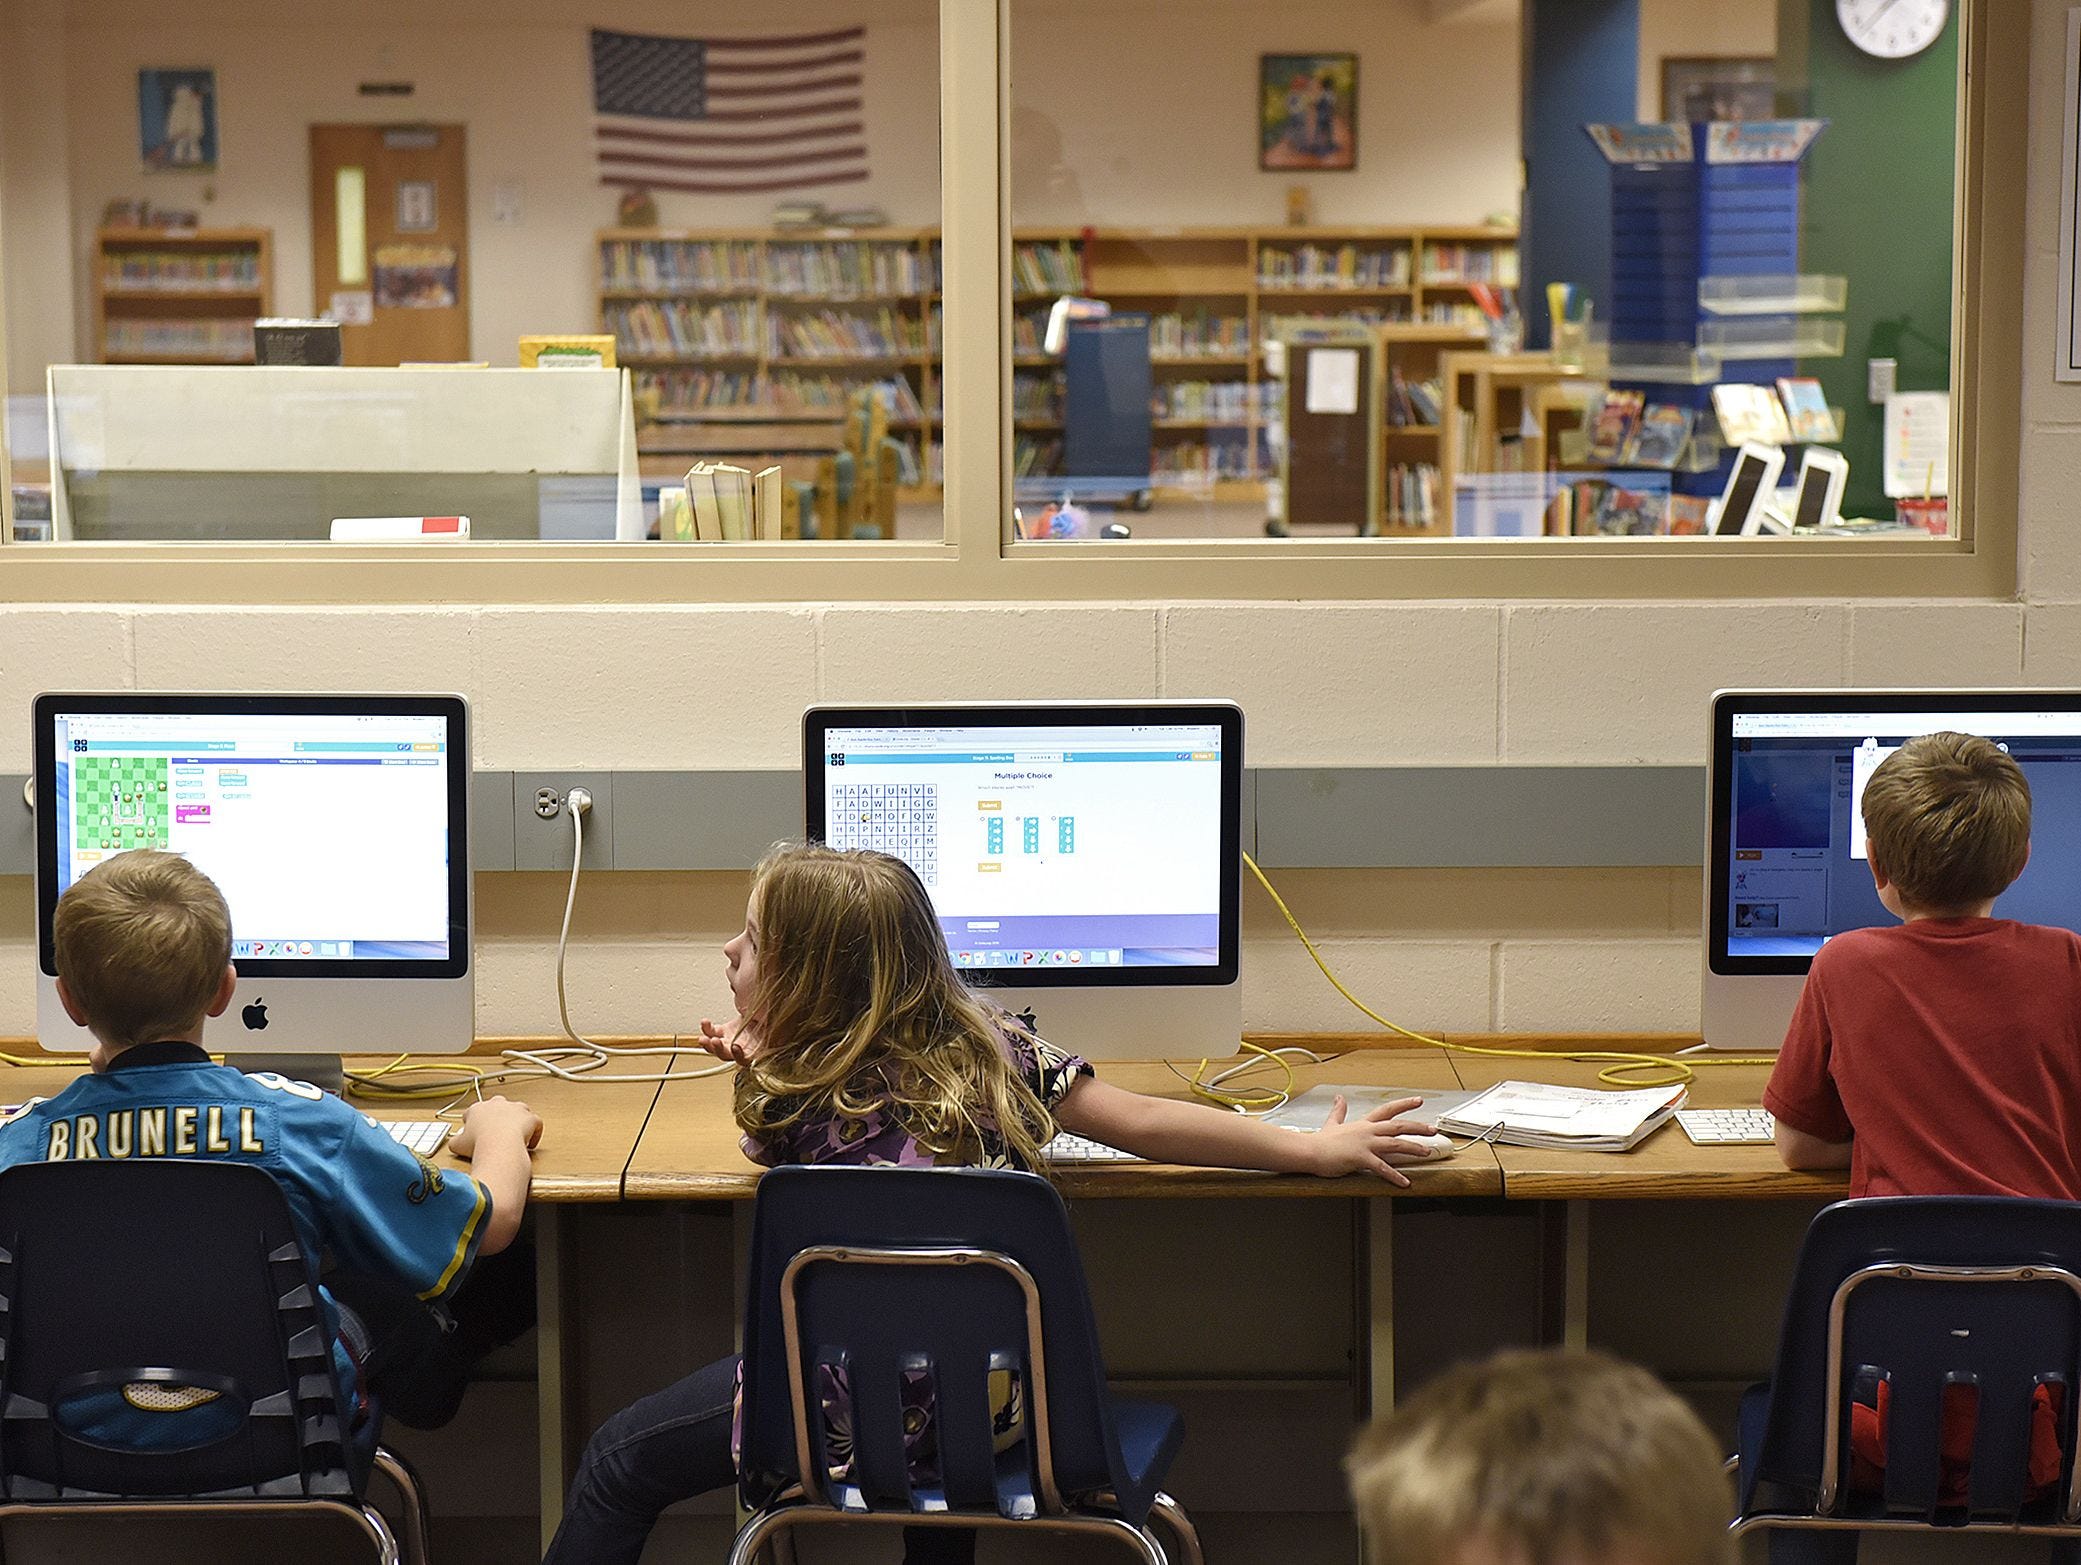 Students take part in a coding exercise during a class at Mississippi Heights Elementary in Sauk Rapids in 2015.